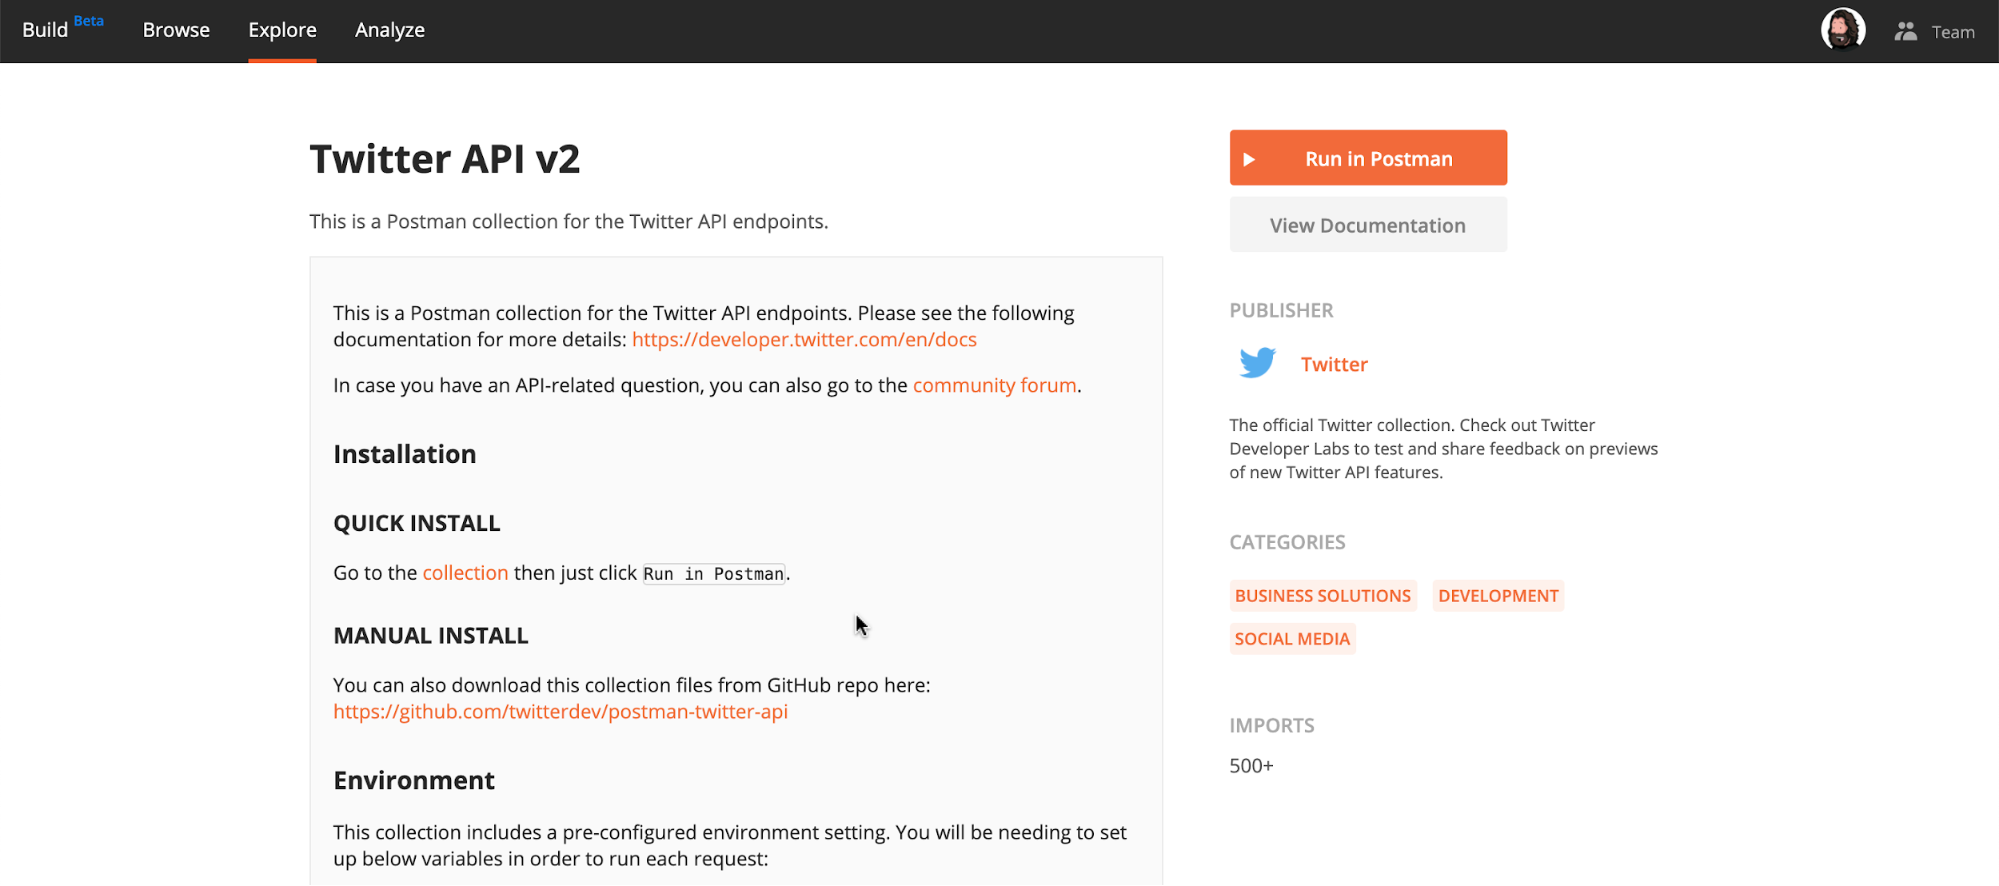 Twitter API v2 collection in Postman